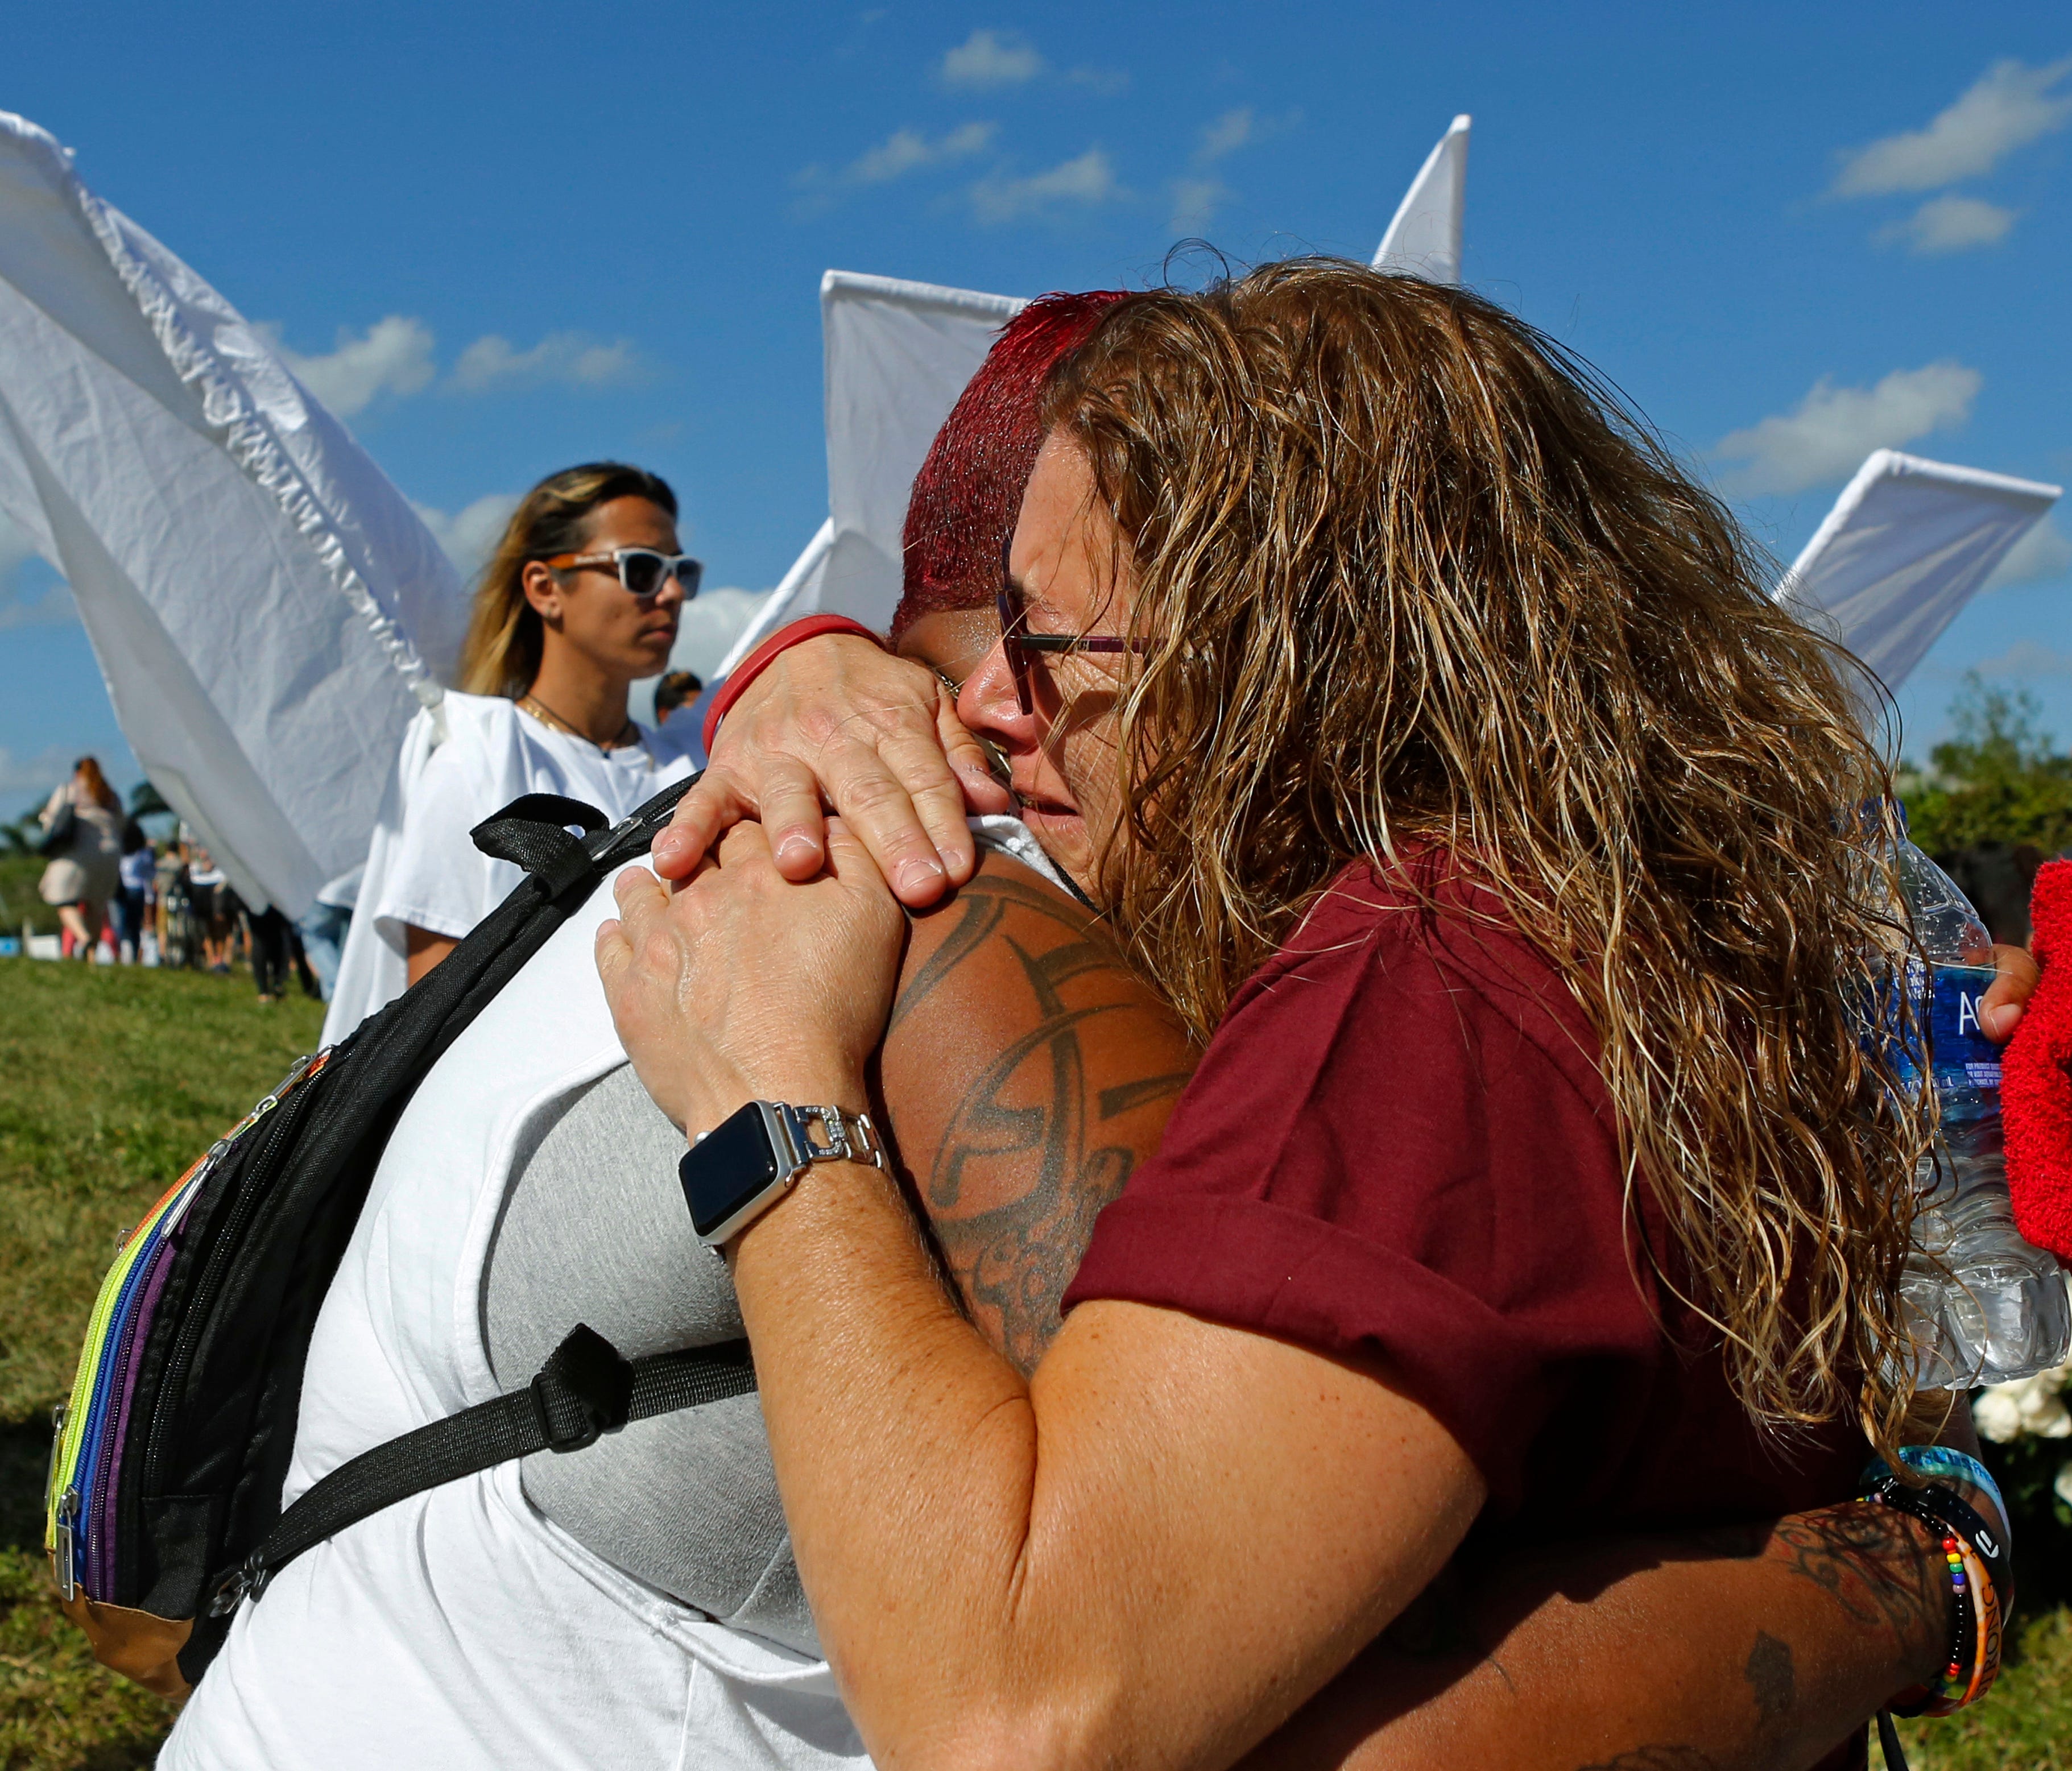 Pulse survivor India Godman, left, hugs Wendy Garrity at Marjory Stoneman Douglas High School in Parkland, Fla., Sunday, Feb. 25, 2018, for an open house as parents and students returned to the school for the first time since a shooting took place at